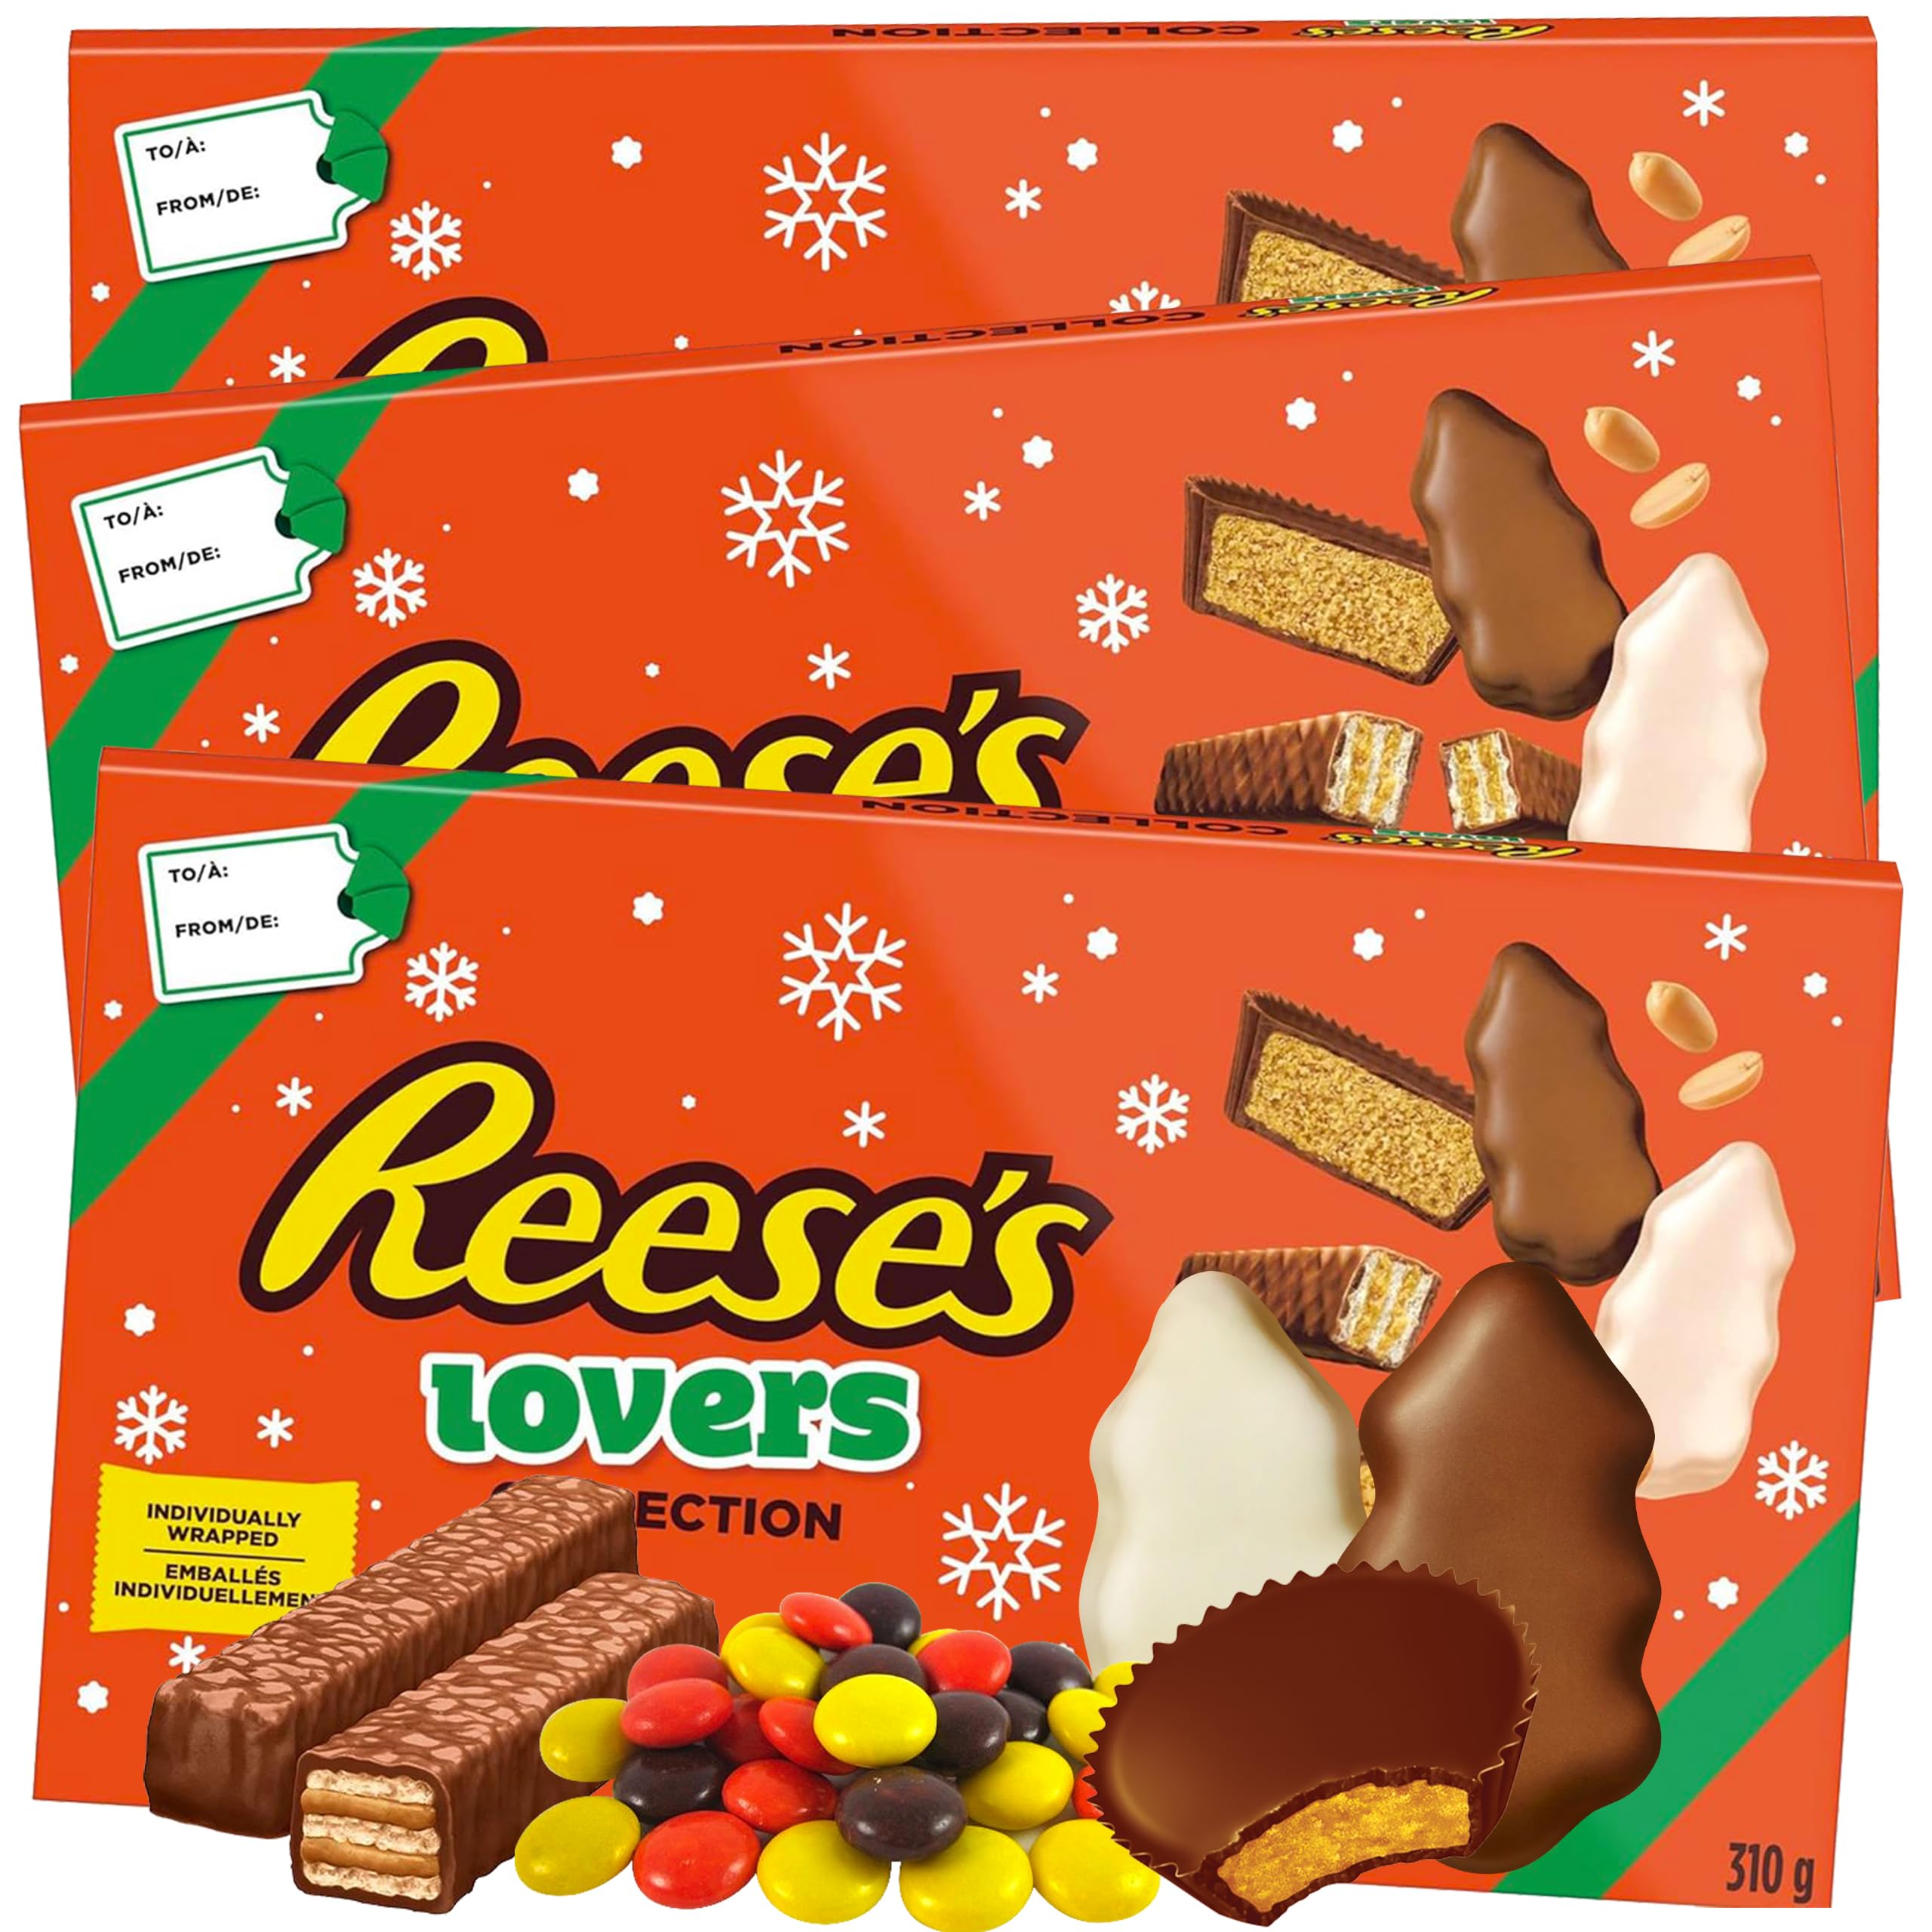 3-Pack of Reese's Christmas Chocolate Candy Gift Box for $9.99